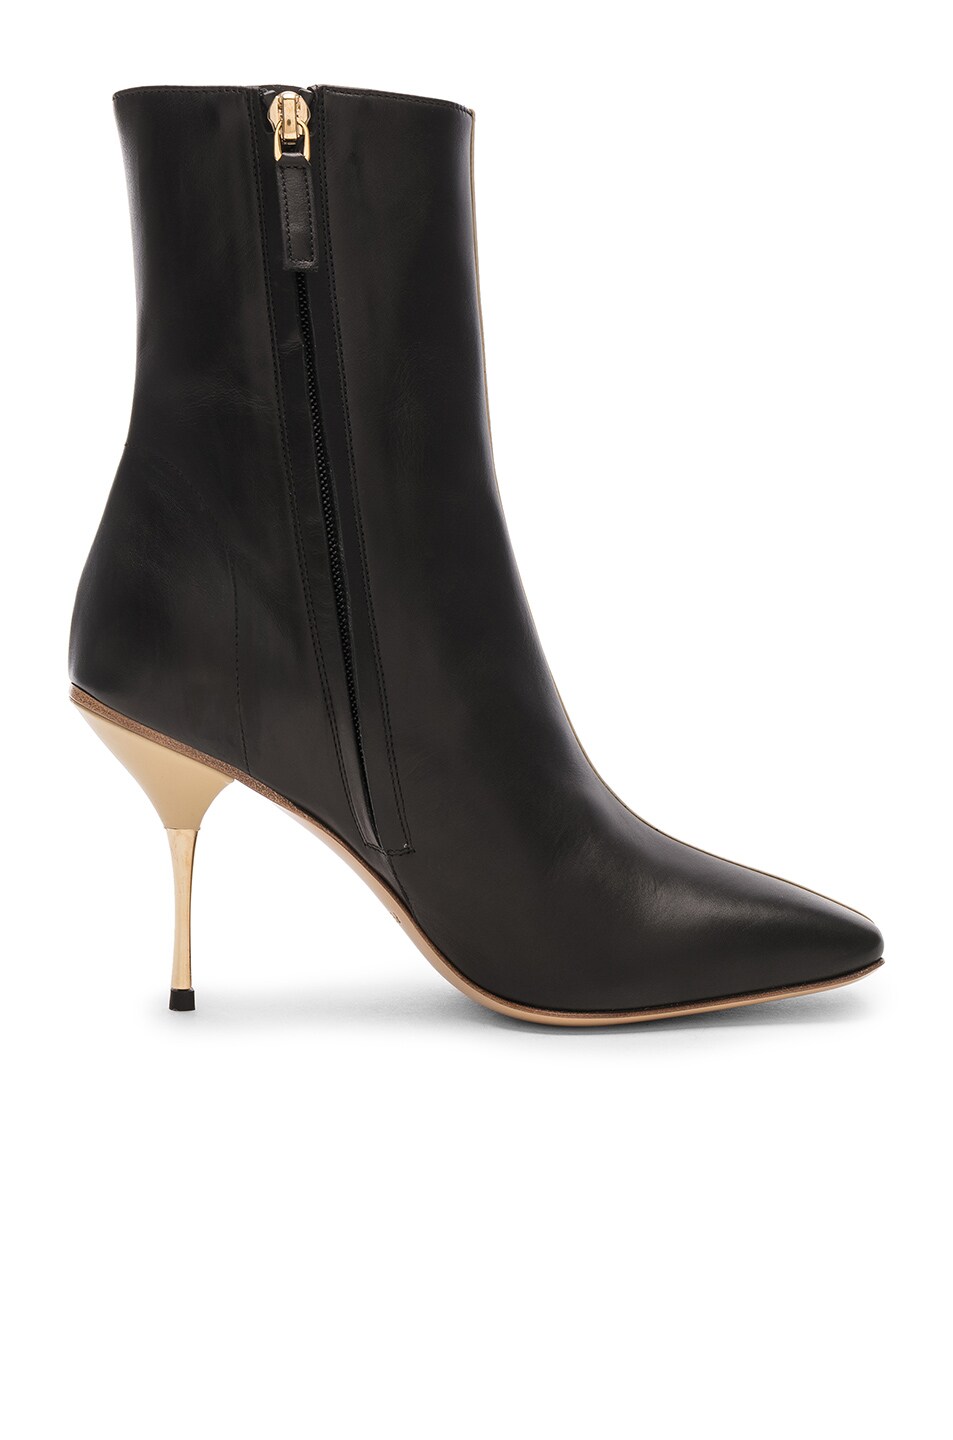 Petar Petrov Leather Svea Ankle Boots in Black, Beige & Gold | FWRD